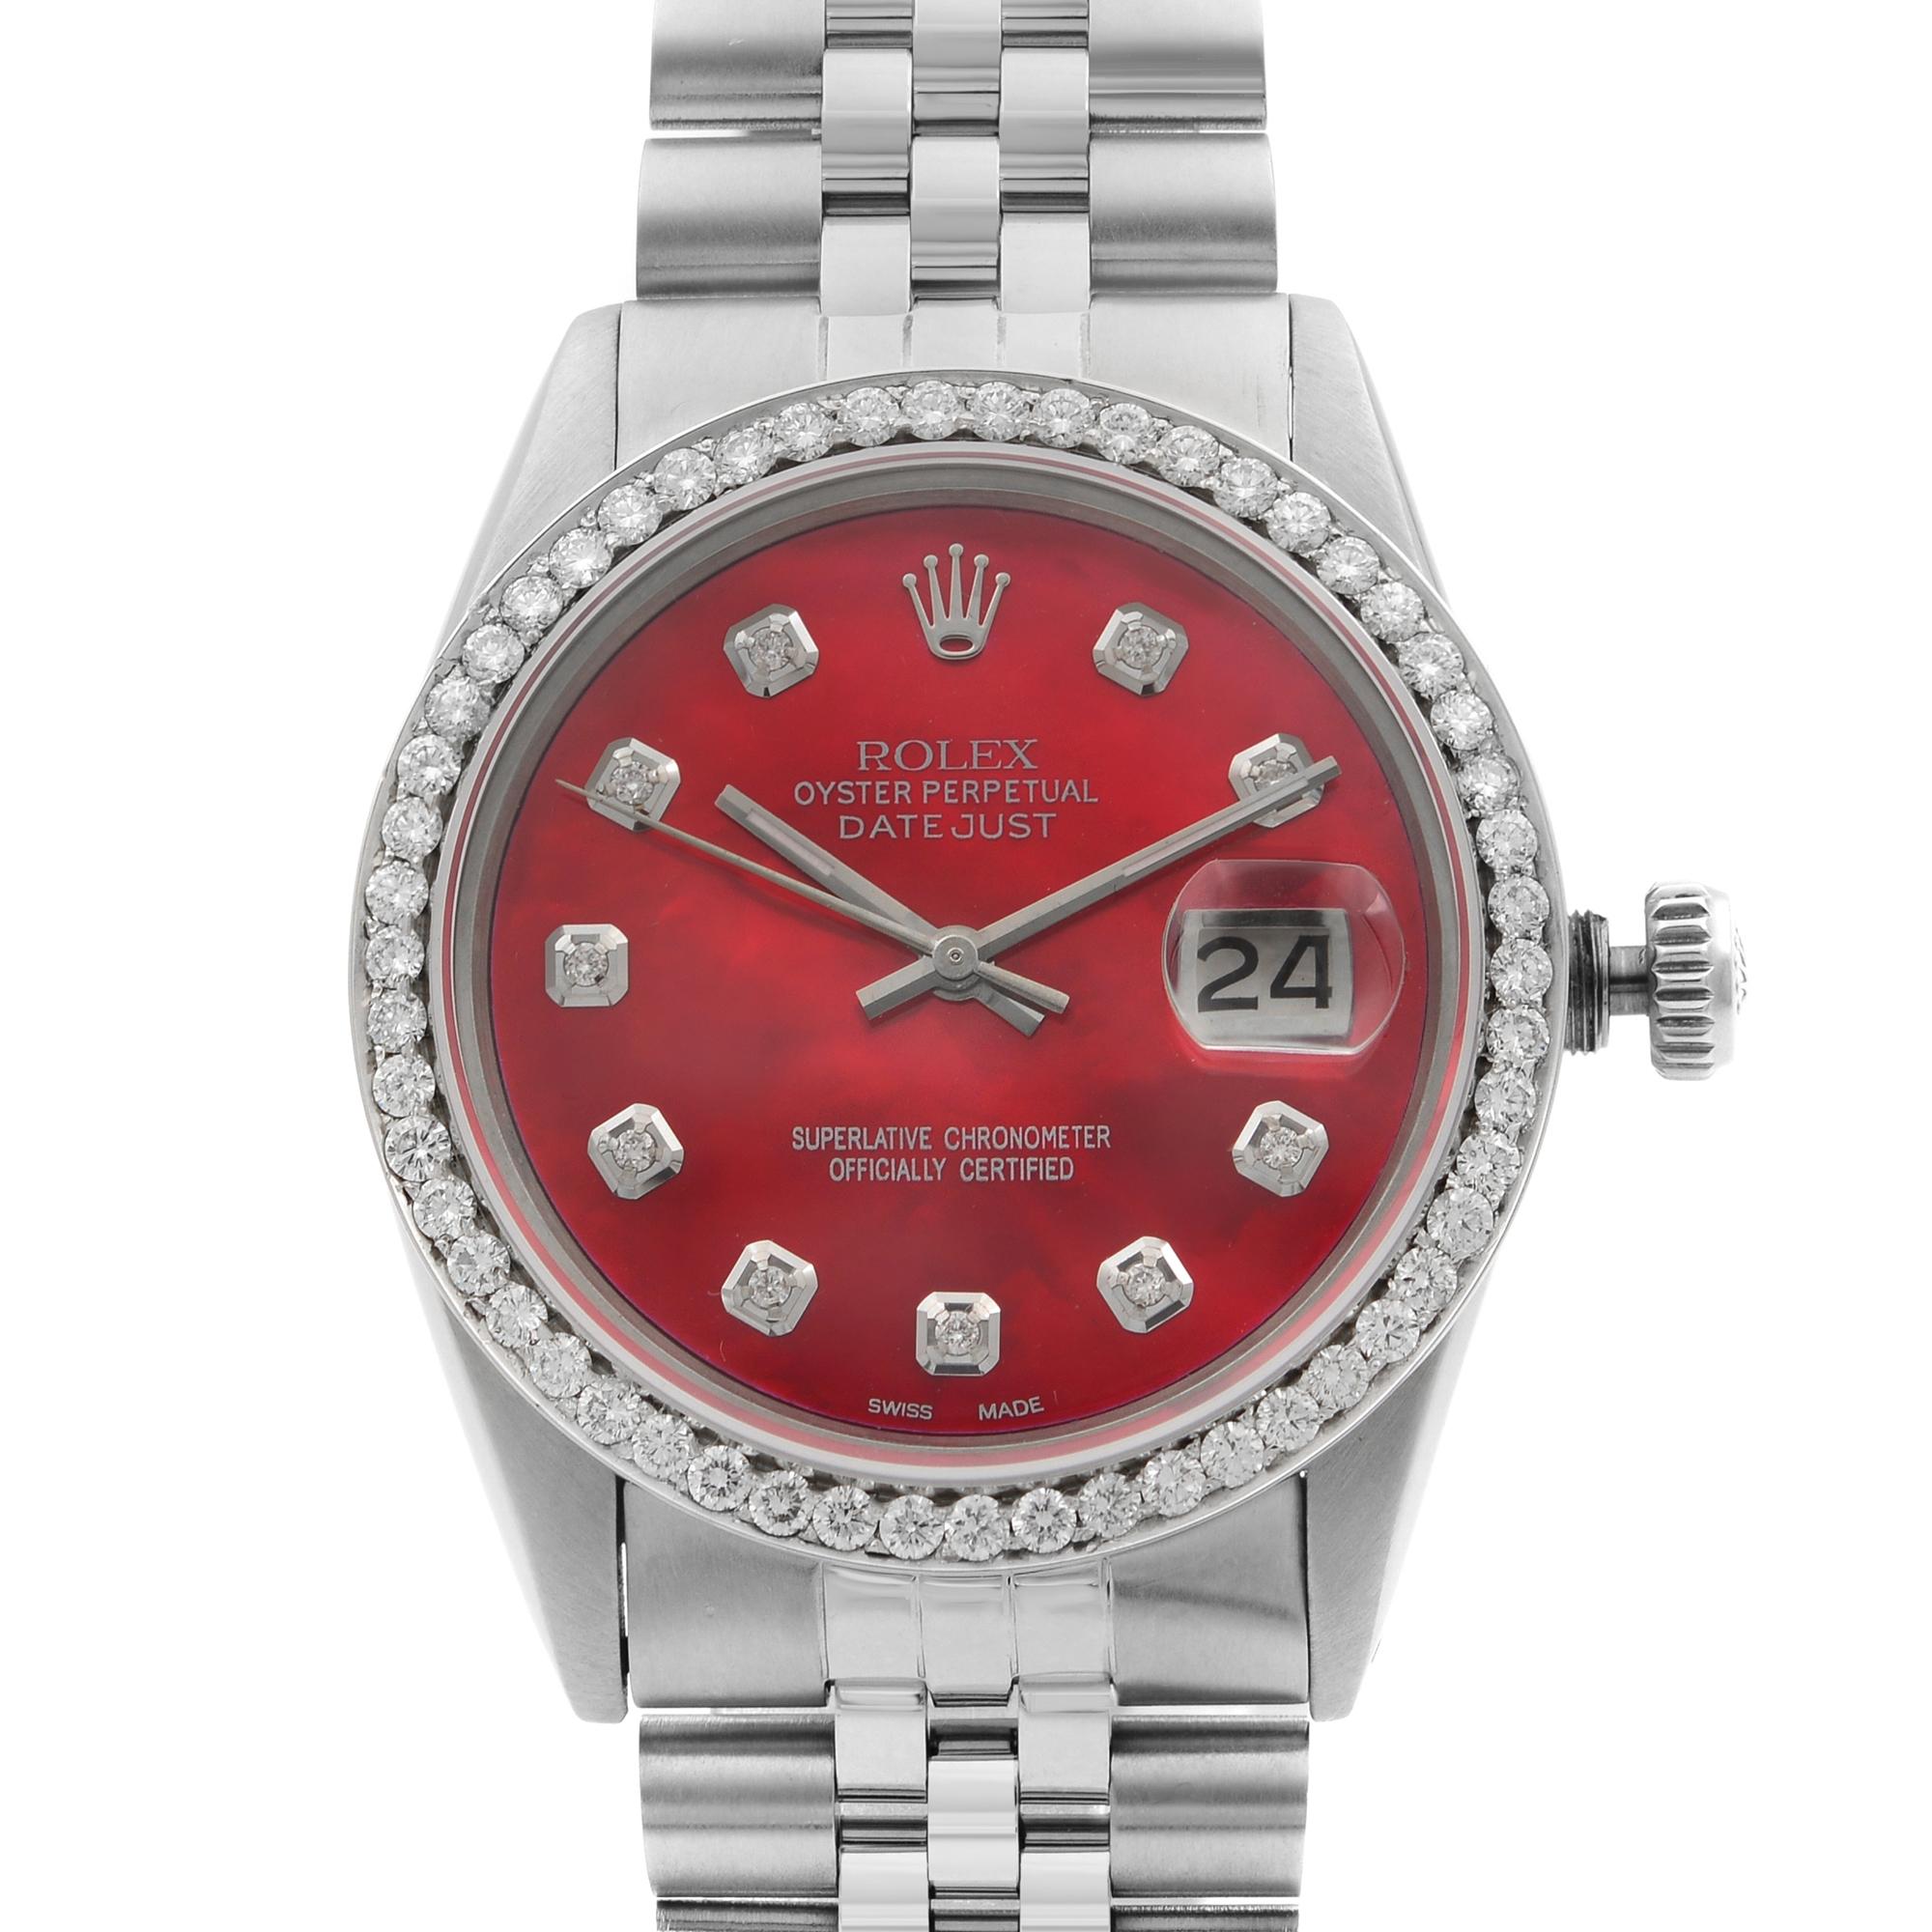 1 Cttw Custom Diamond Bezel and 0.20 Cttw Custom Diamond Red MOP Dial. Original Box and Papers are not included comes with a Chronostore presentation box and authenticity card. Covered by a one-year Chronostore warranty.Details:
Model